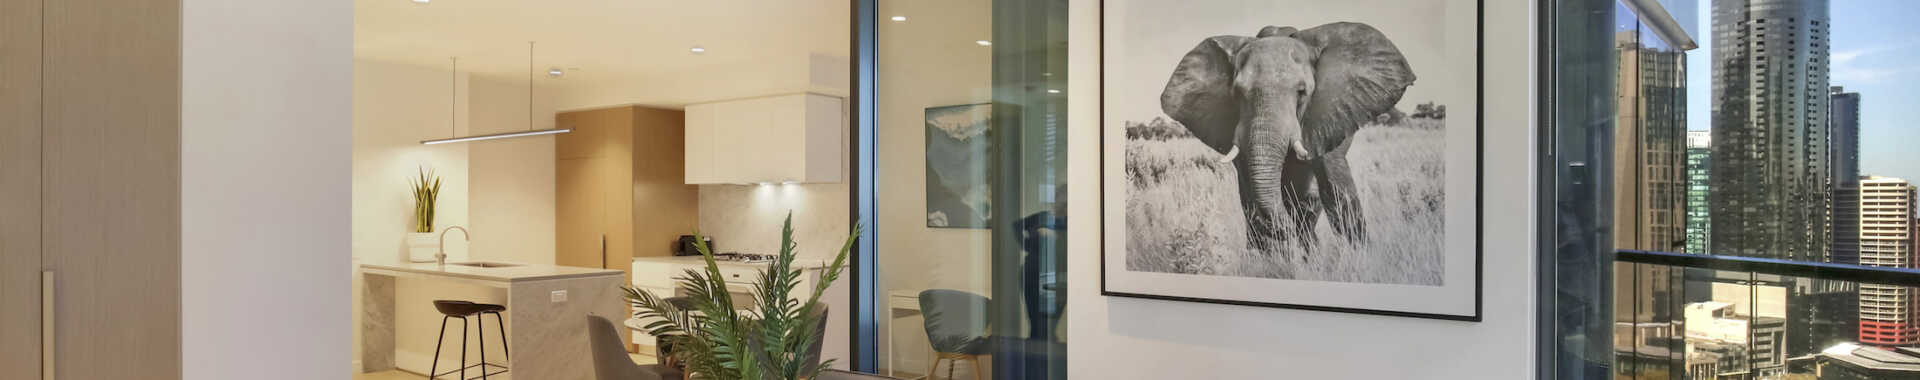 Long Stay Accommodation Melbourne CBD - Astra Apartments Collins St 1 Bed Corporate Apartment